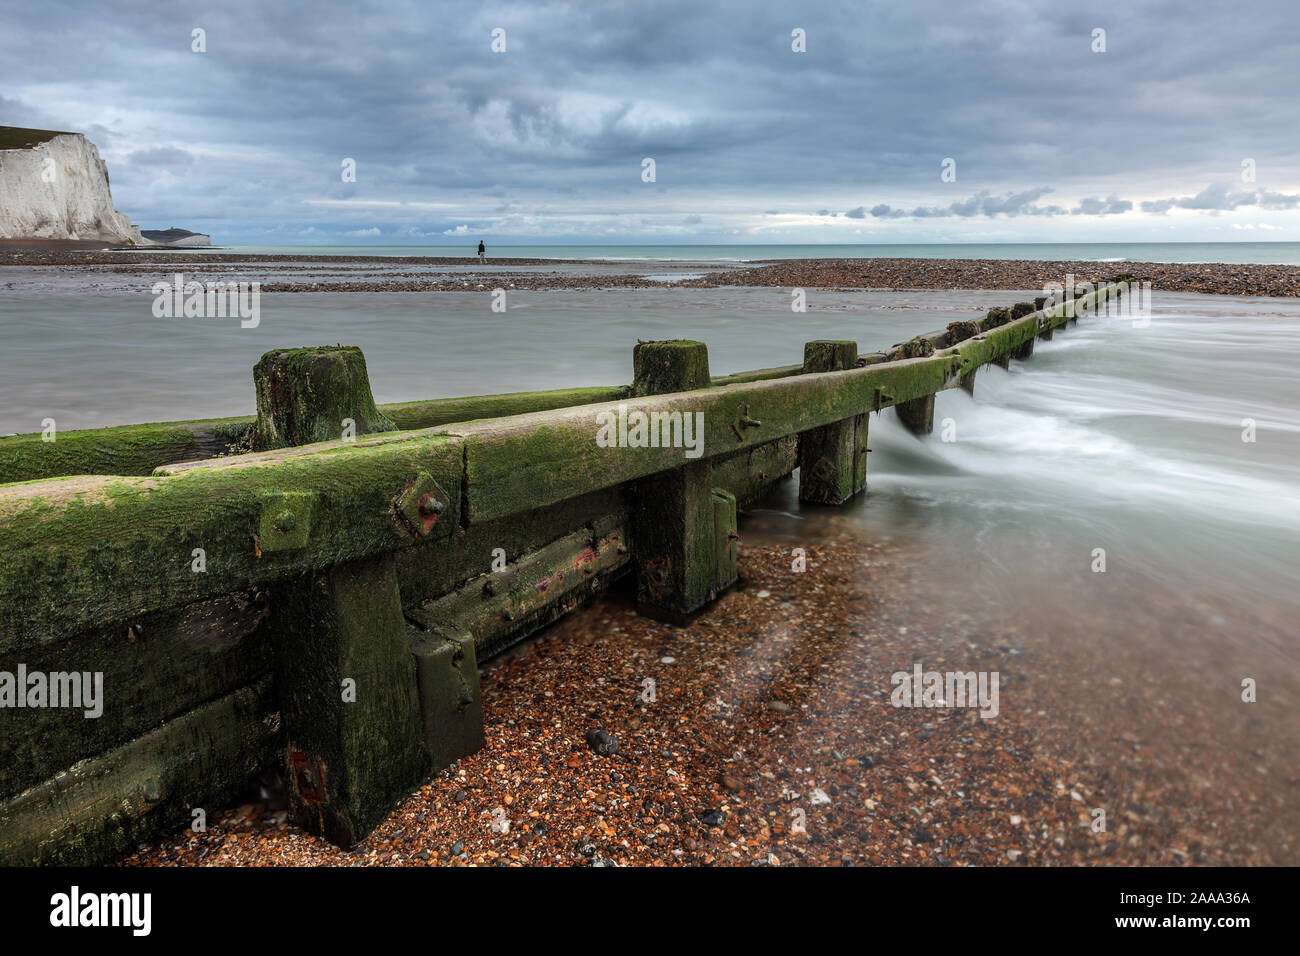 Wooden beach groyne, covered in green seaweed extending into the sea, lone figure in distance, at Cuckmere Haven, Seaford, East Sussex, England, UK Stock Photo